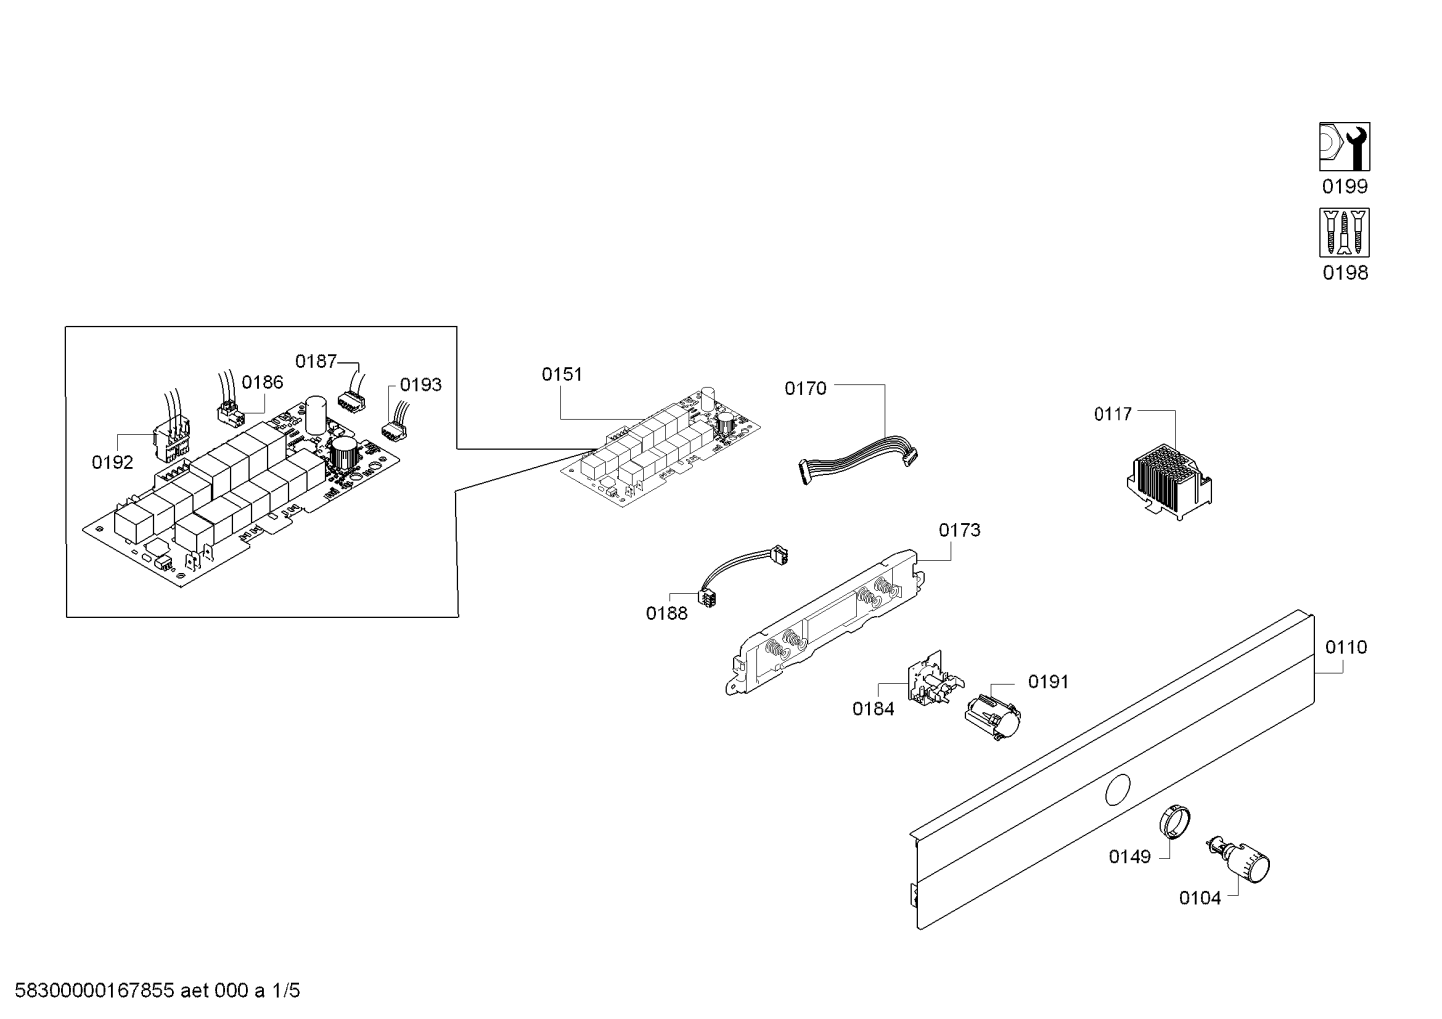 drawing_link_1_device_1826648